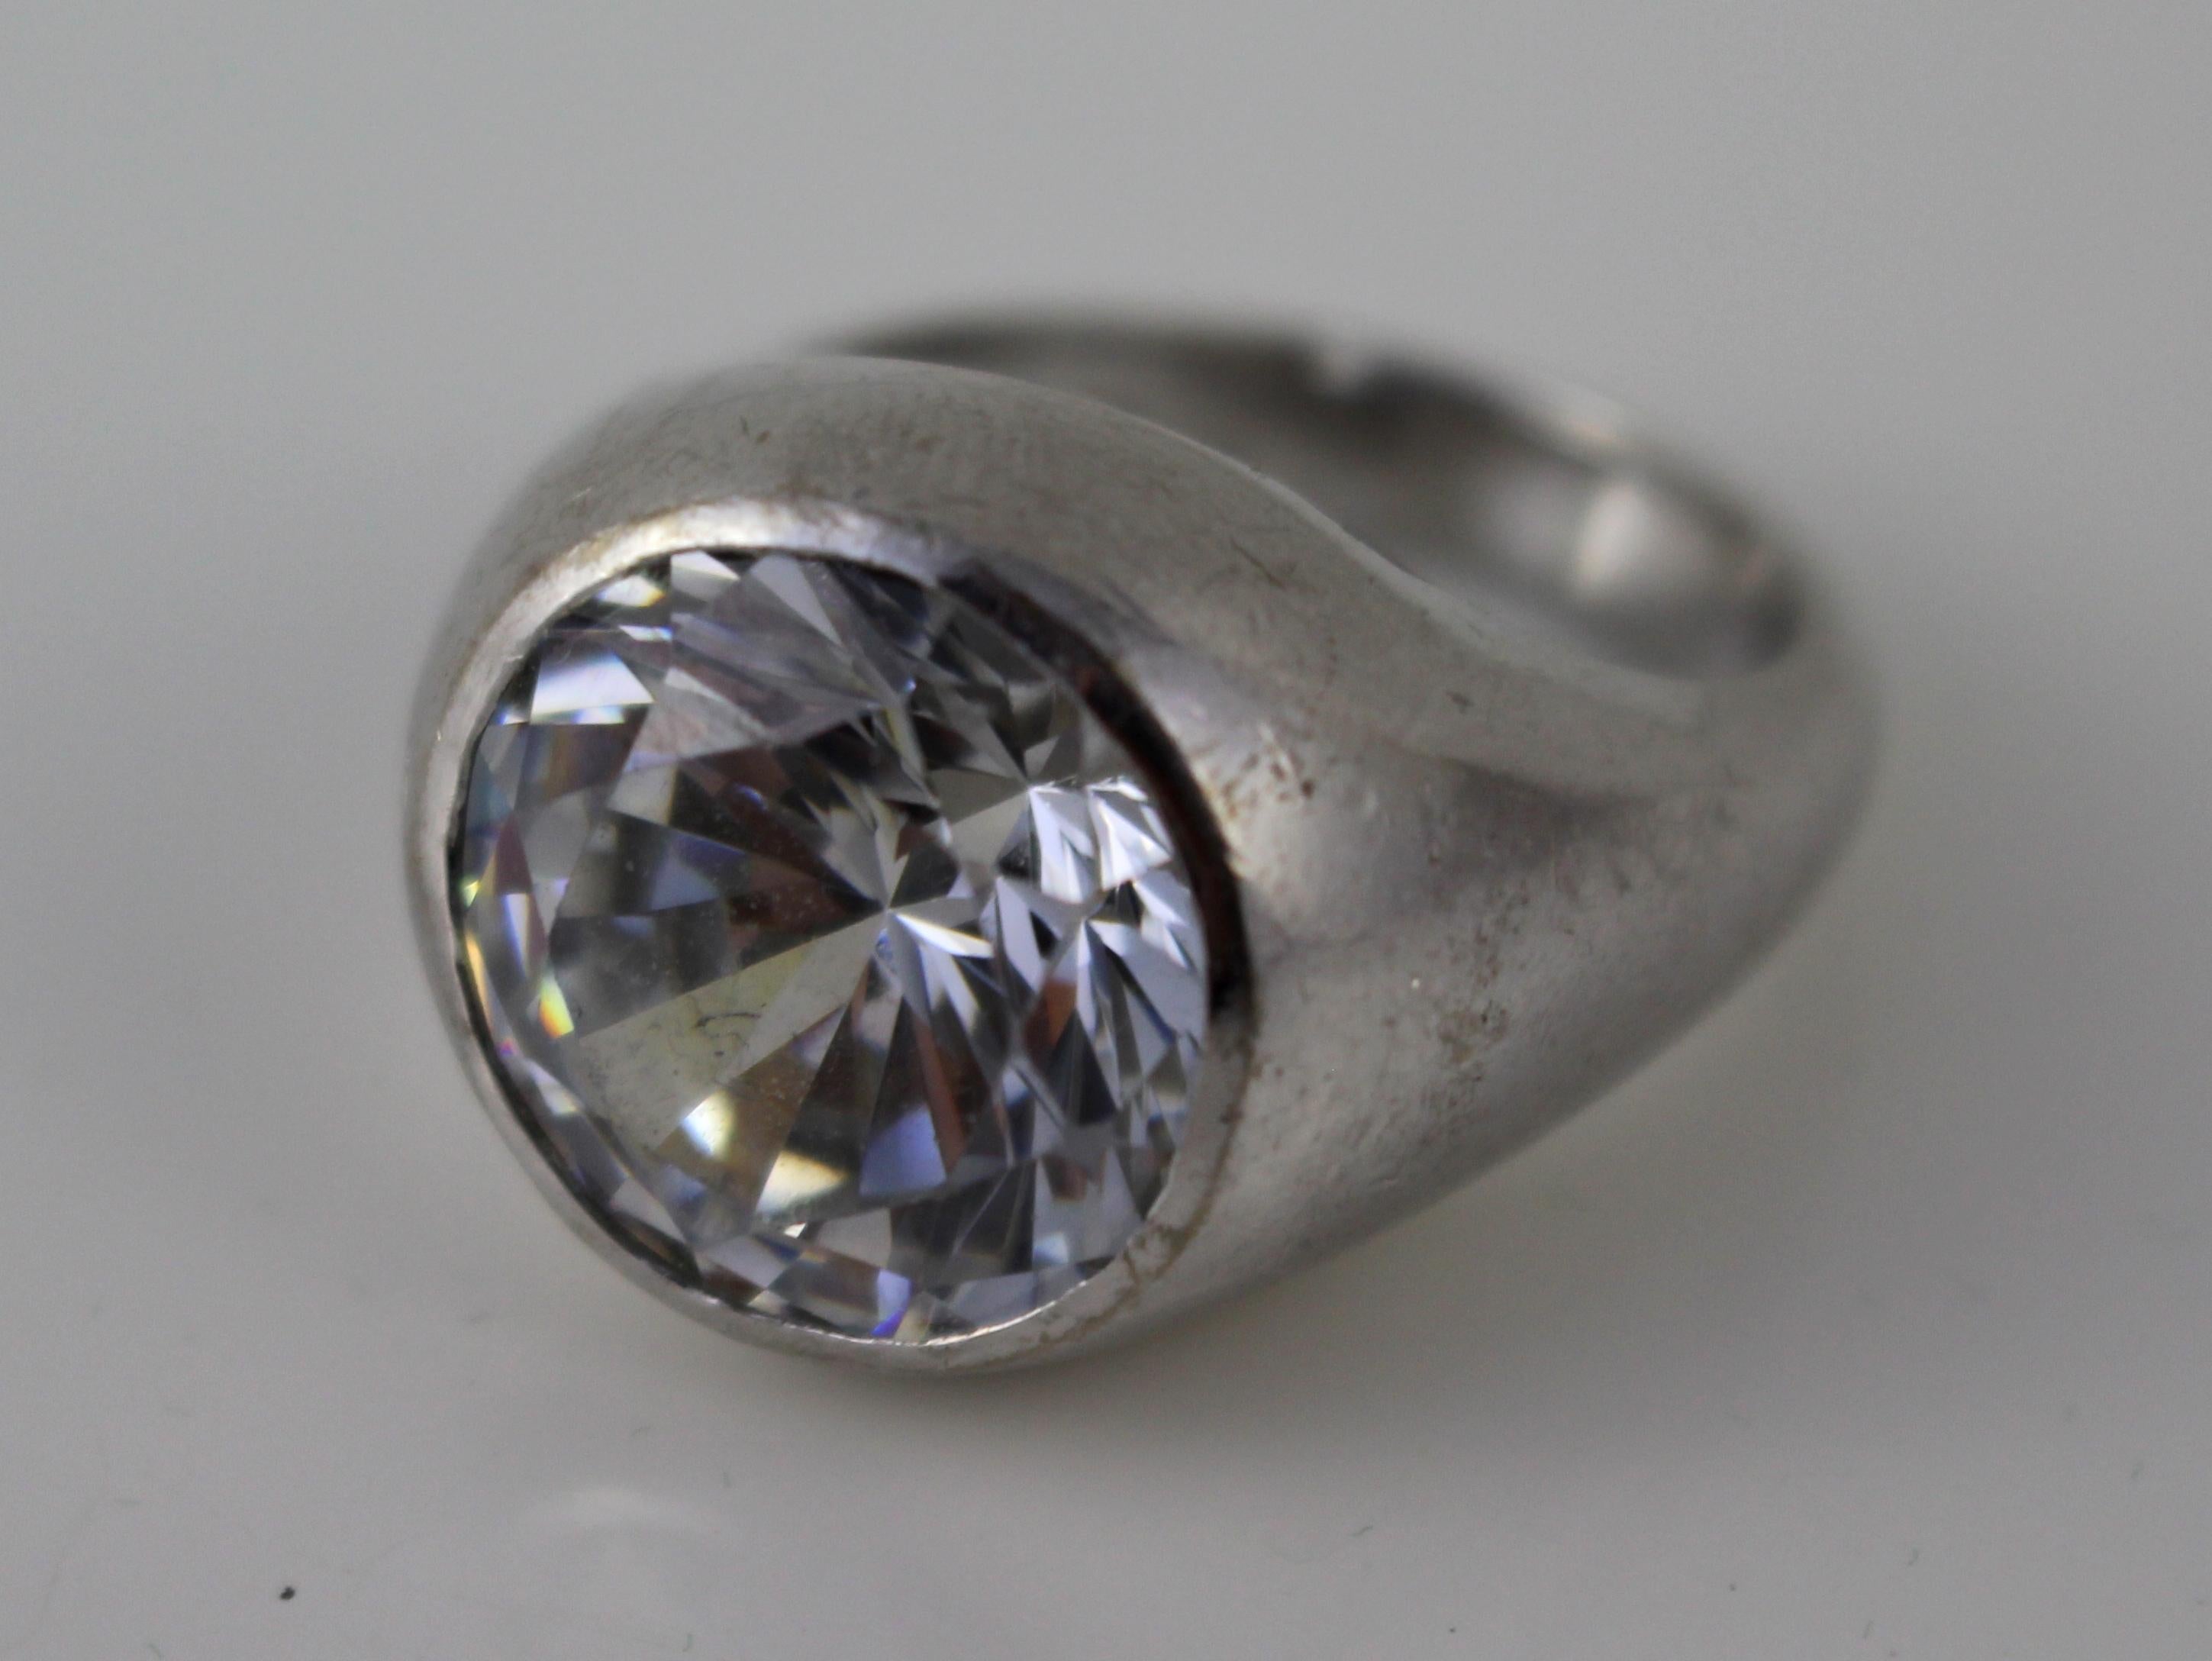 Stone round mixed cut colourless cubic zirconia, measuring approximate 15.3 mm diameter, depth 9.44 mm. Estimated carat weight 17.00 carat, light surface wear
Setting Rub over setting into tapering white mount measuring approximate 17.6 mm at